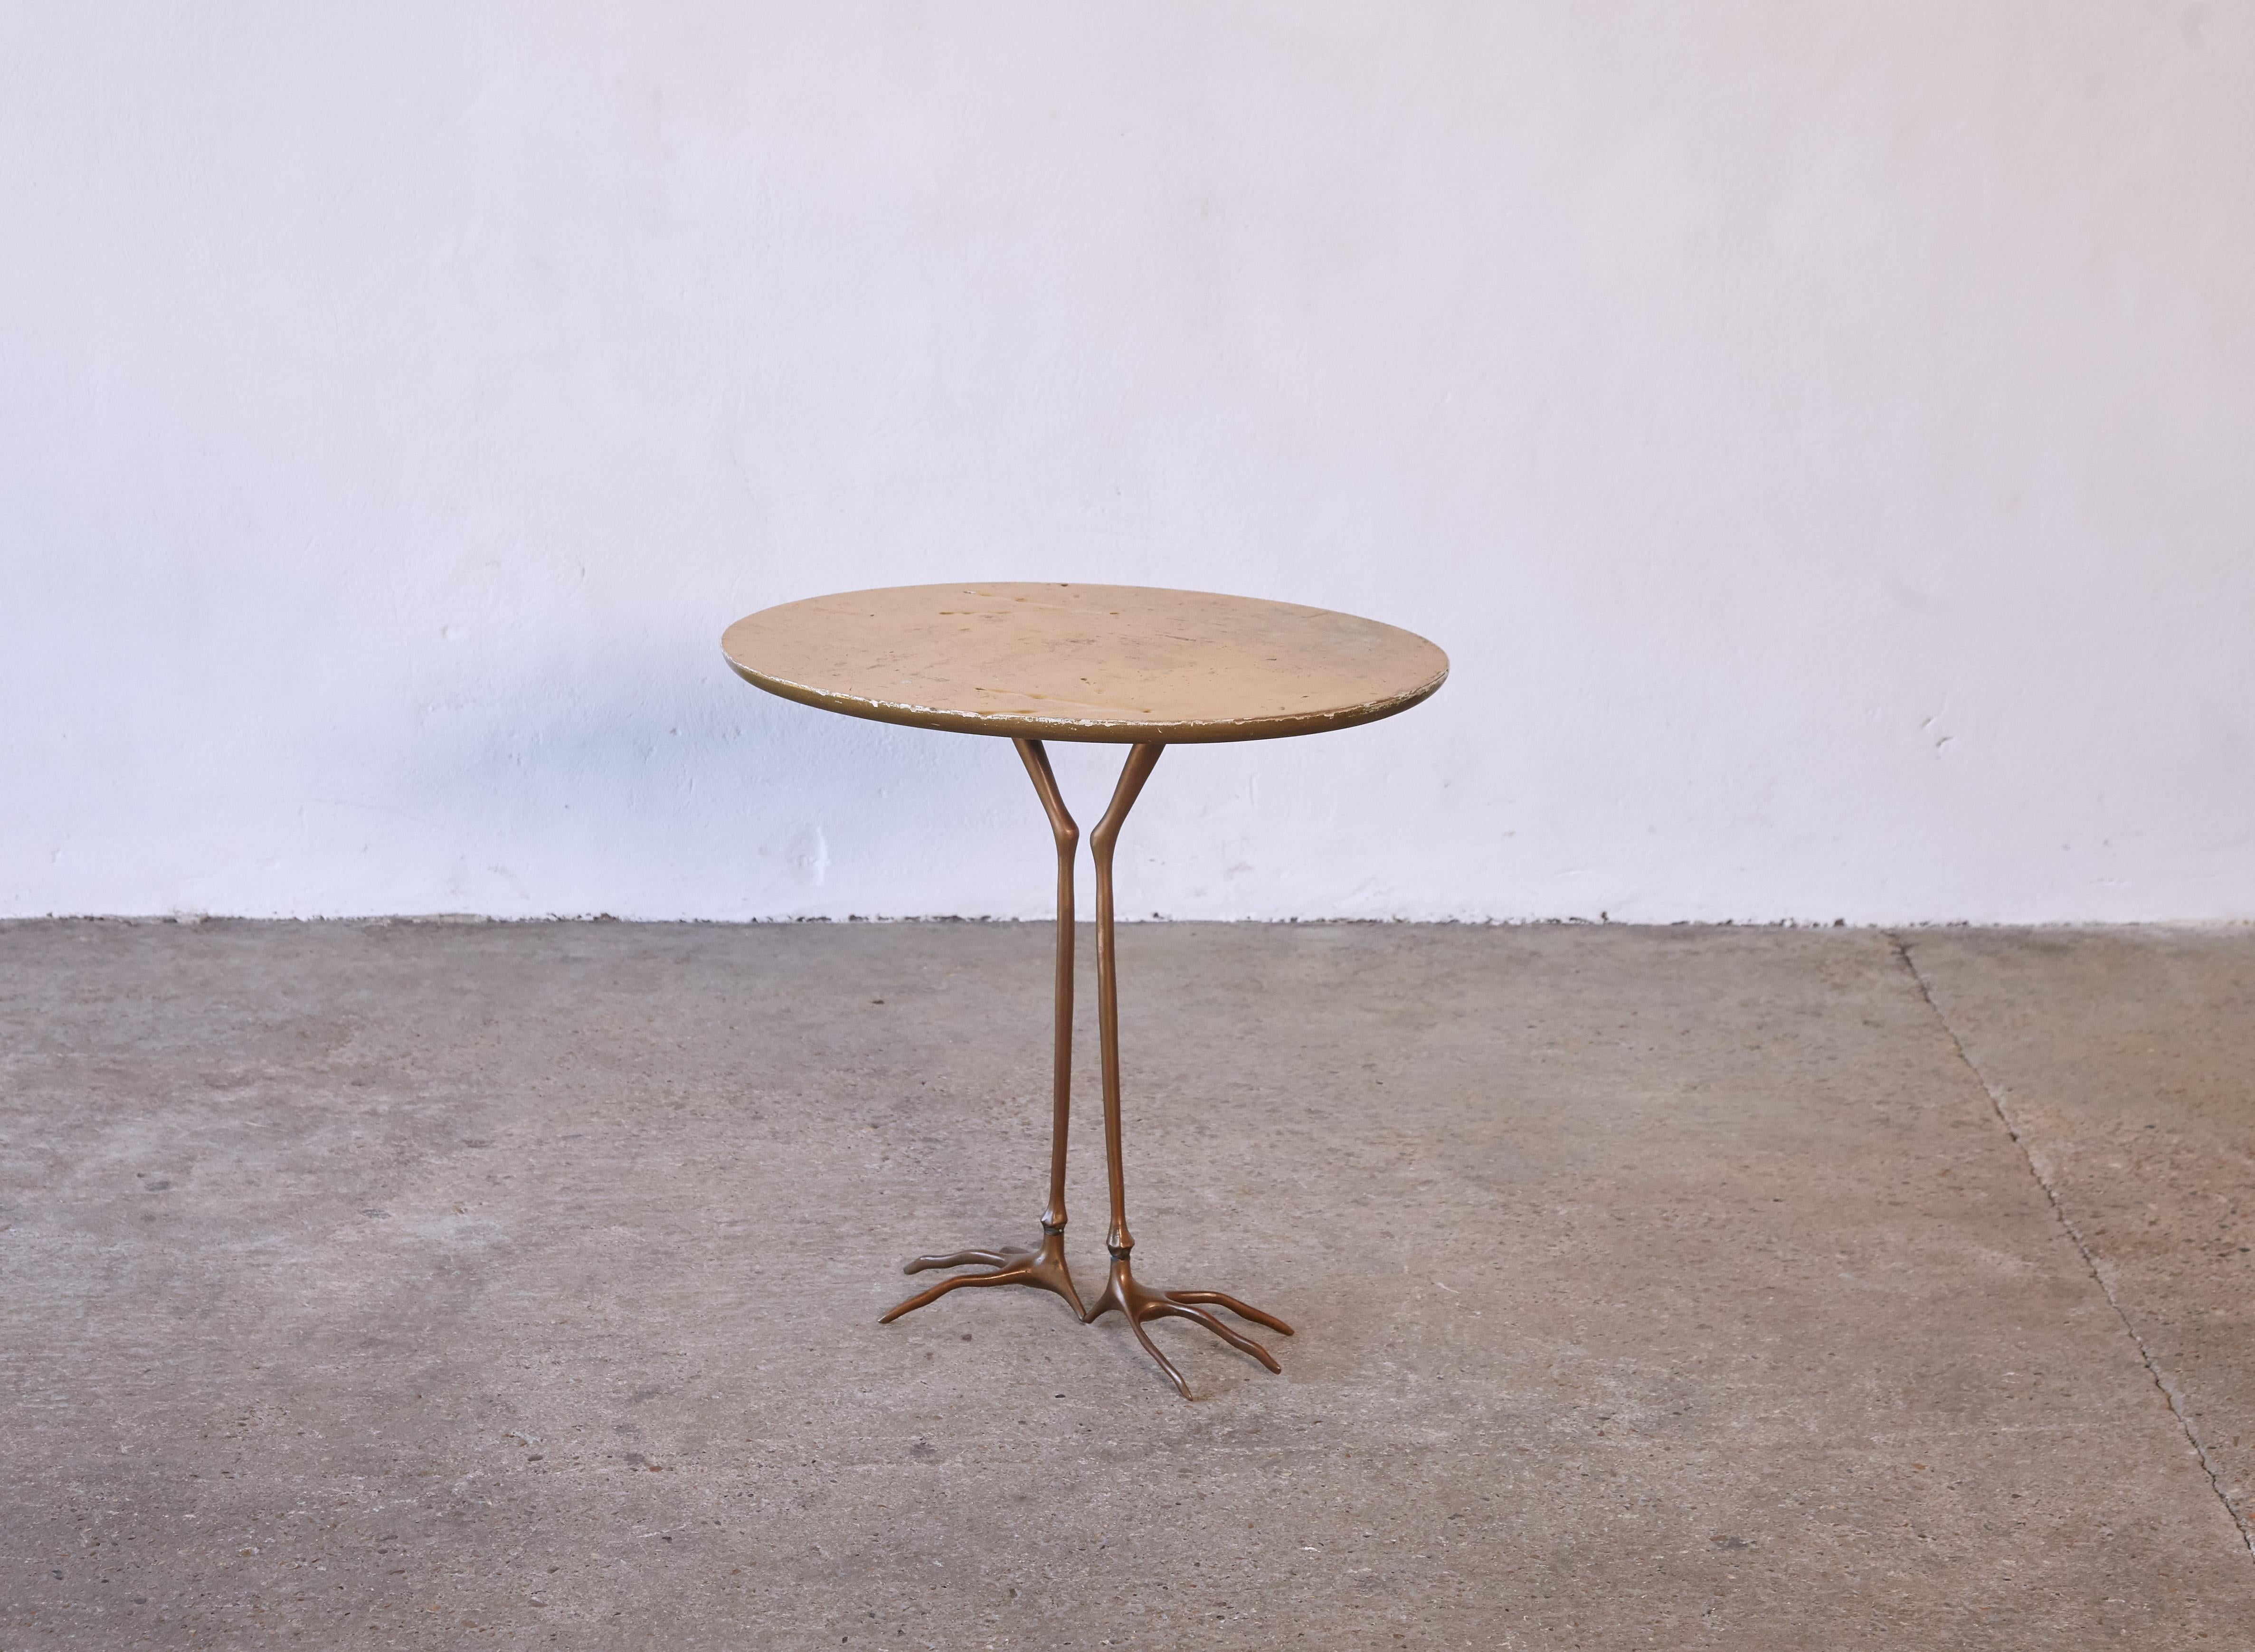 An original and authentic Meret Oppenheim Traccia table. This table manufactured by Gavina, Italy as part of the initial production in the 1970s. Oval shaped, original gold leaf top featuring bird footprints, on top of patinated cast bronze bird